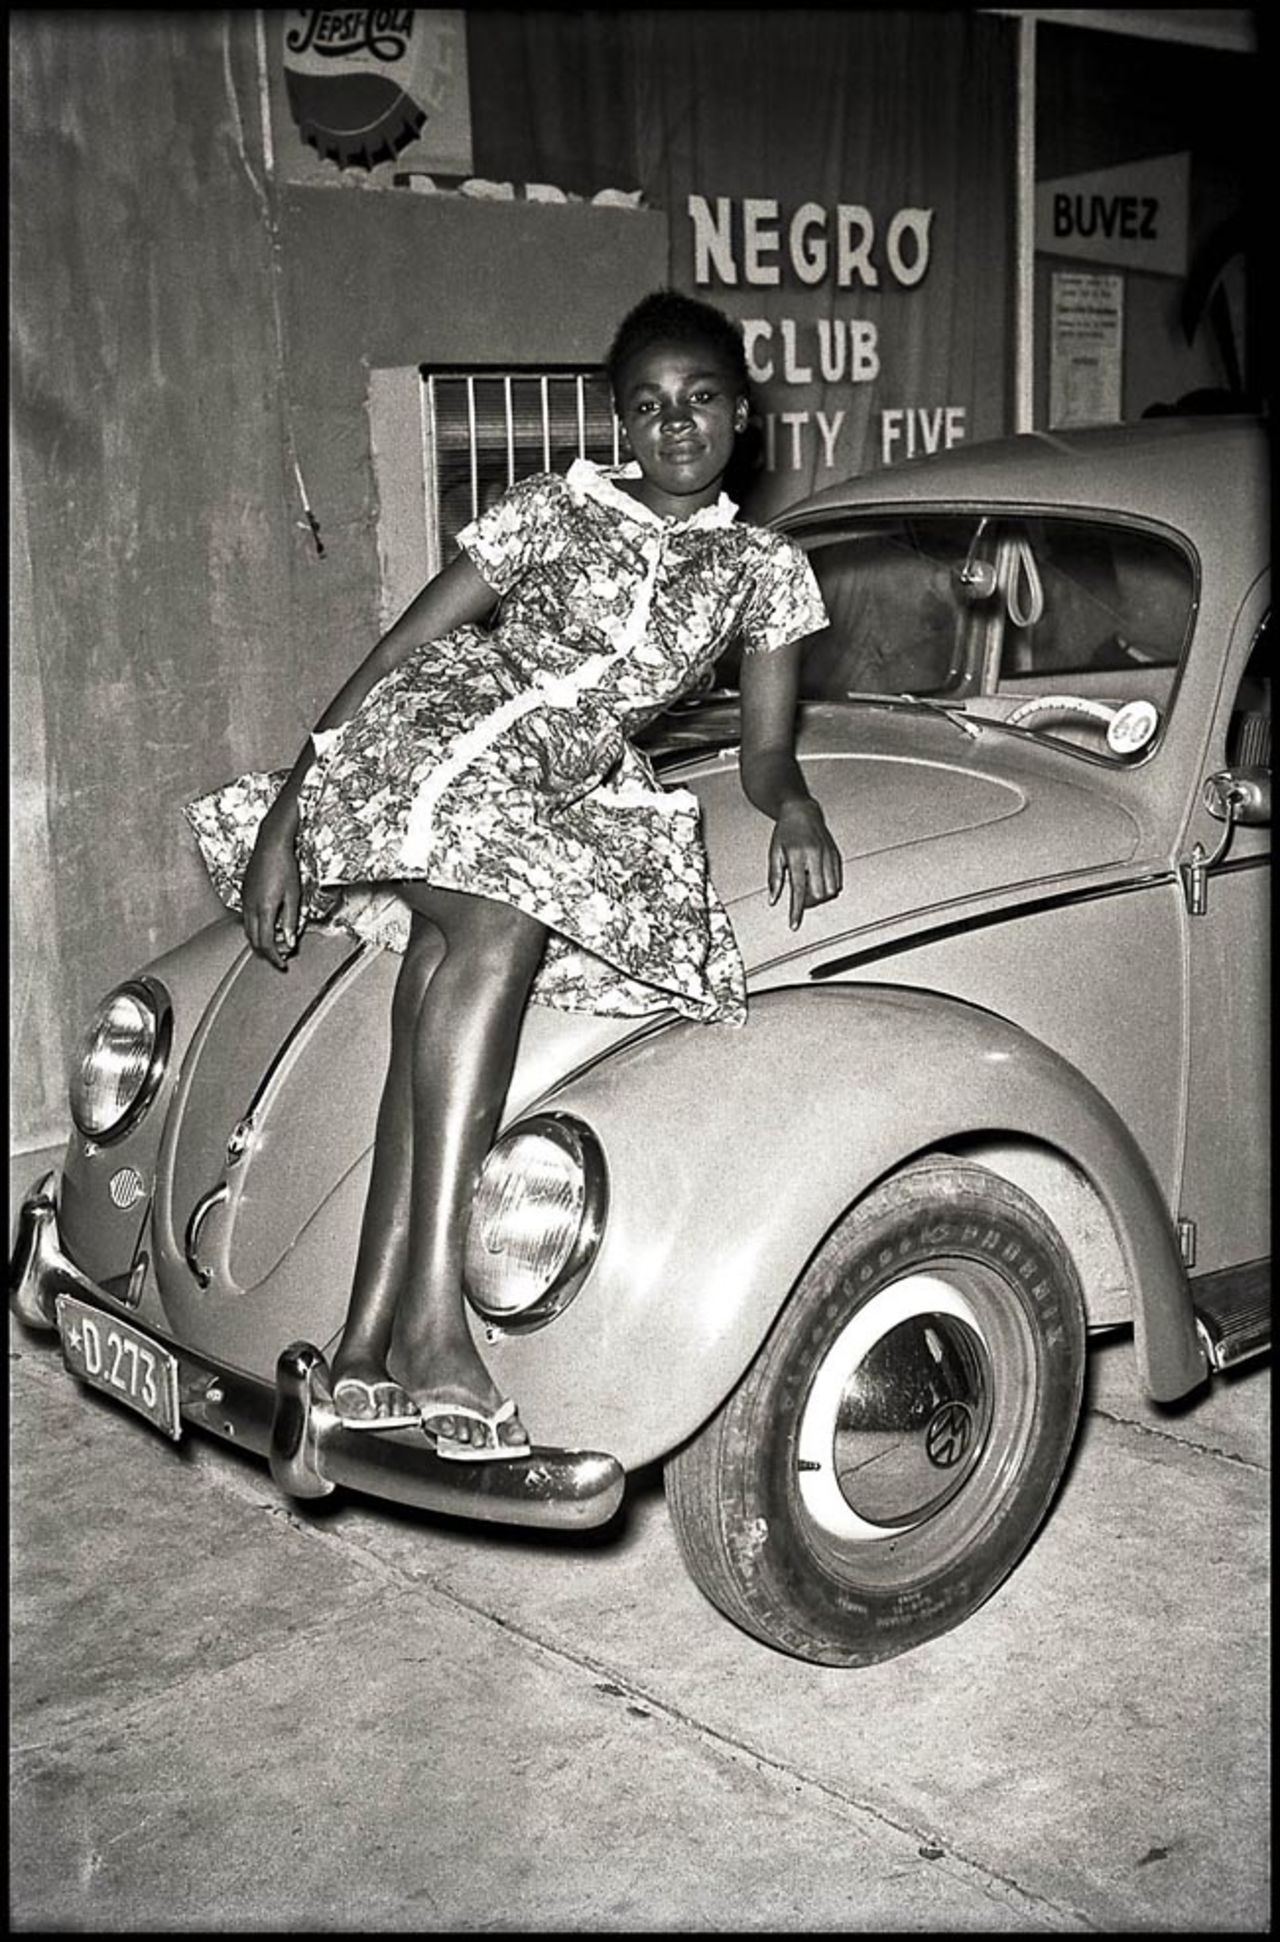 Depara also captured other areas of Congo's youth culture. Whilst the Bills were defending their territories, others were heading to the busy clubs of Kinshasa, known for its Polka, Maringa, Tango and Rumba scenes.